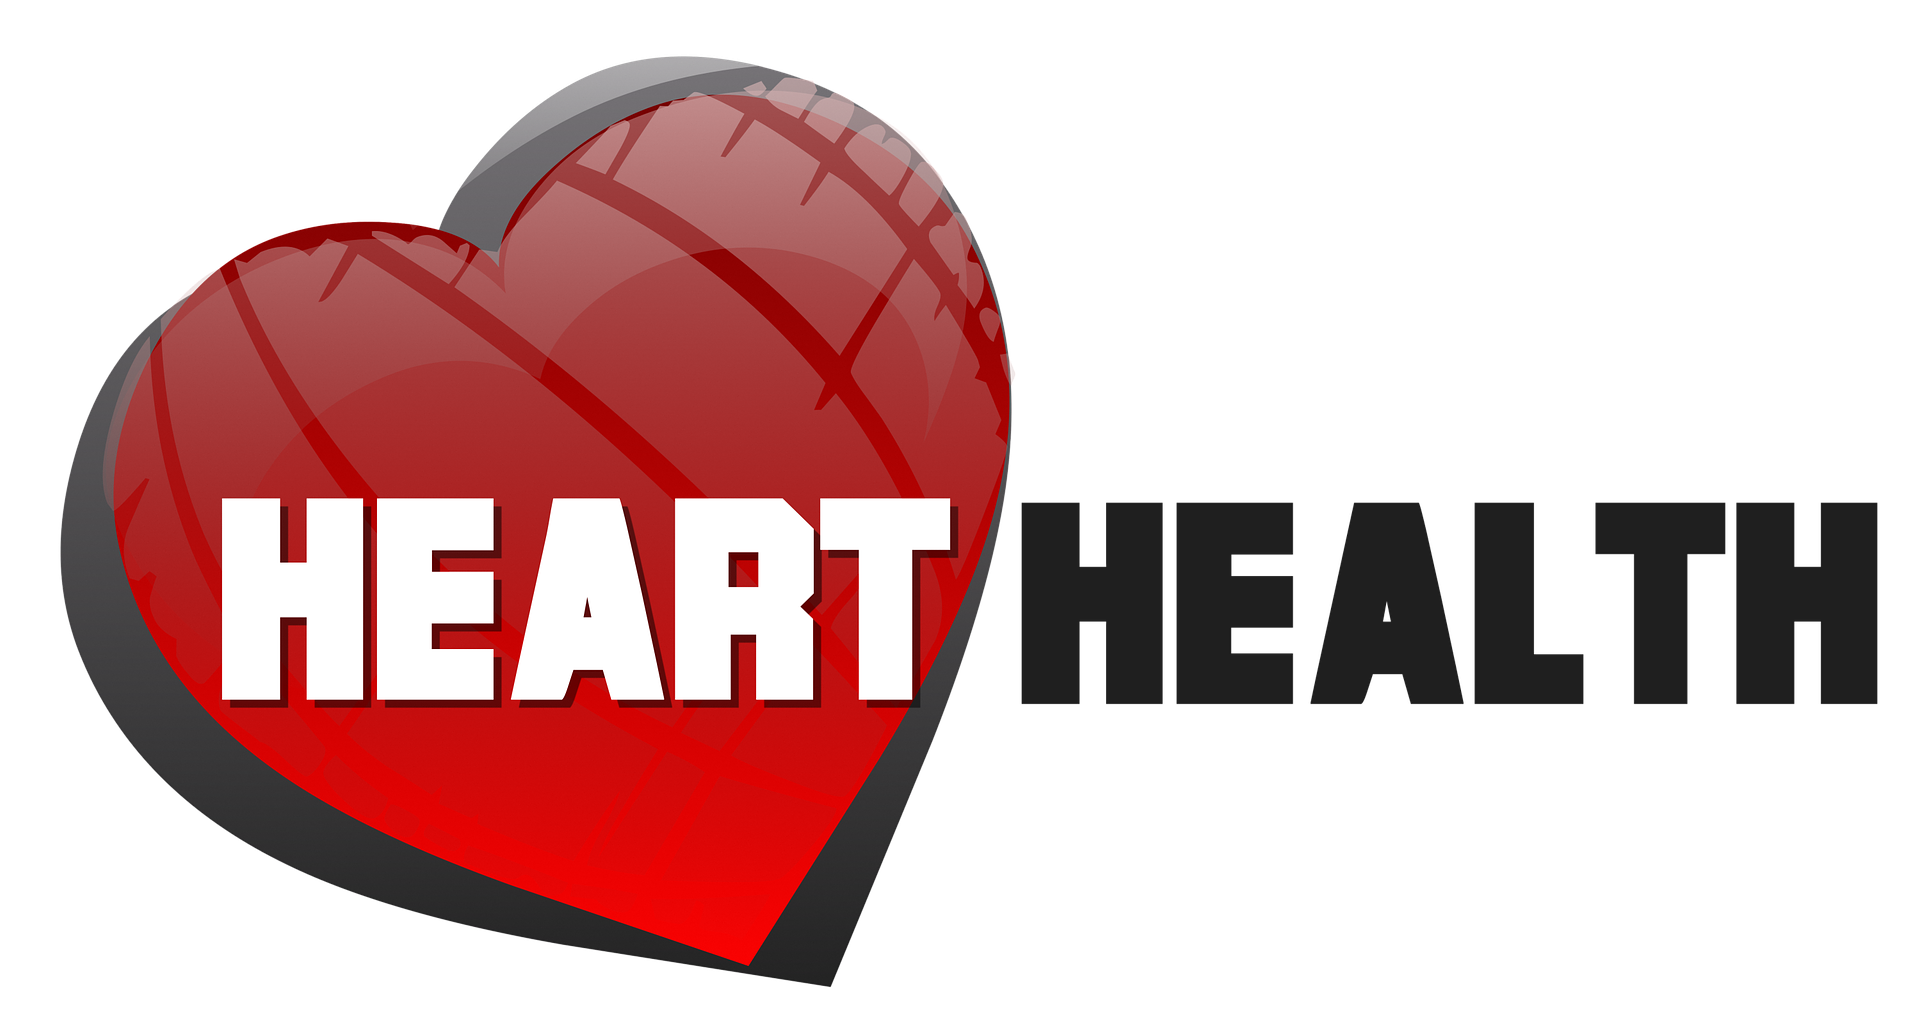 heart-1357923_1920.png